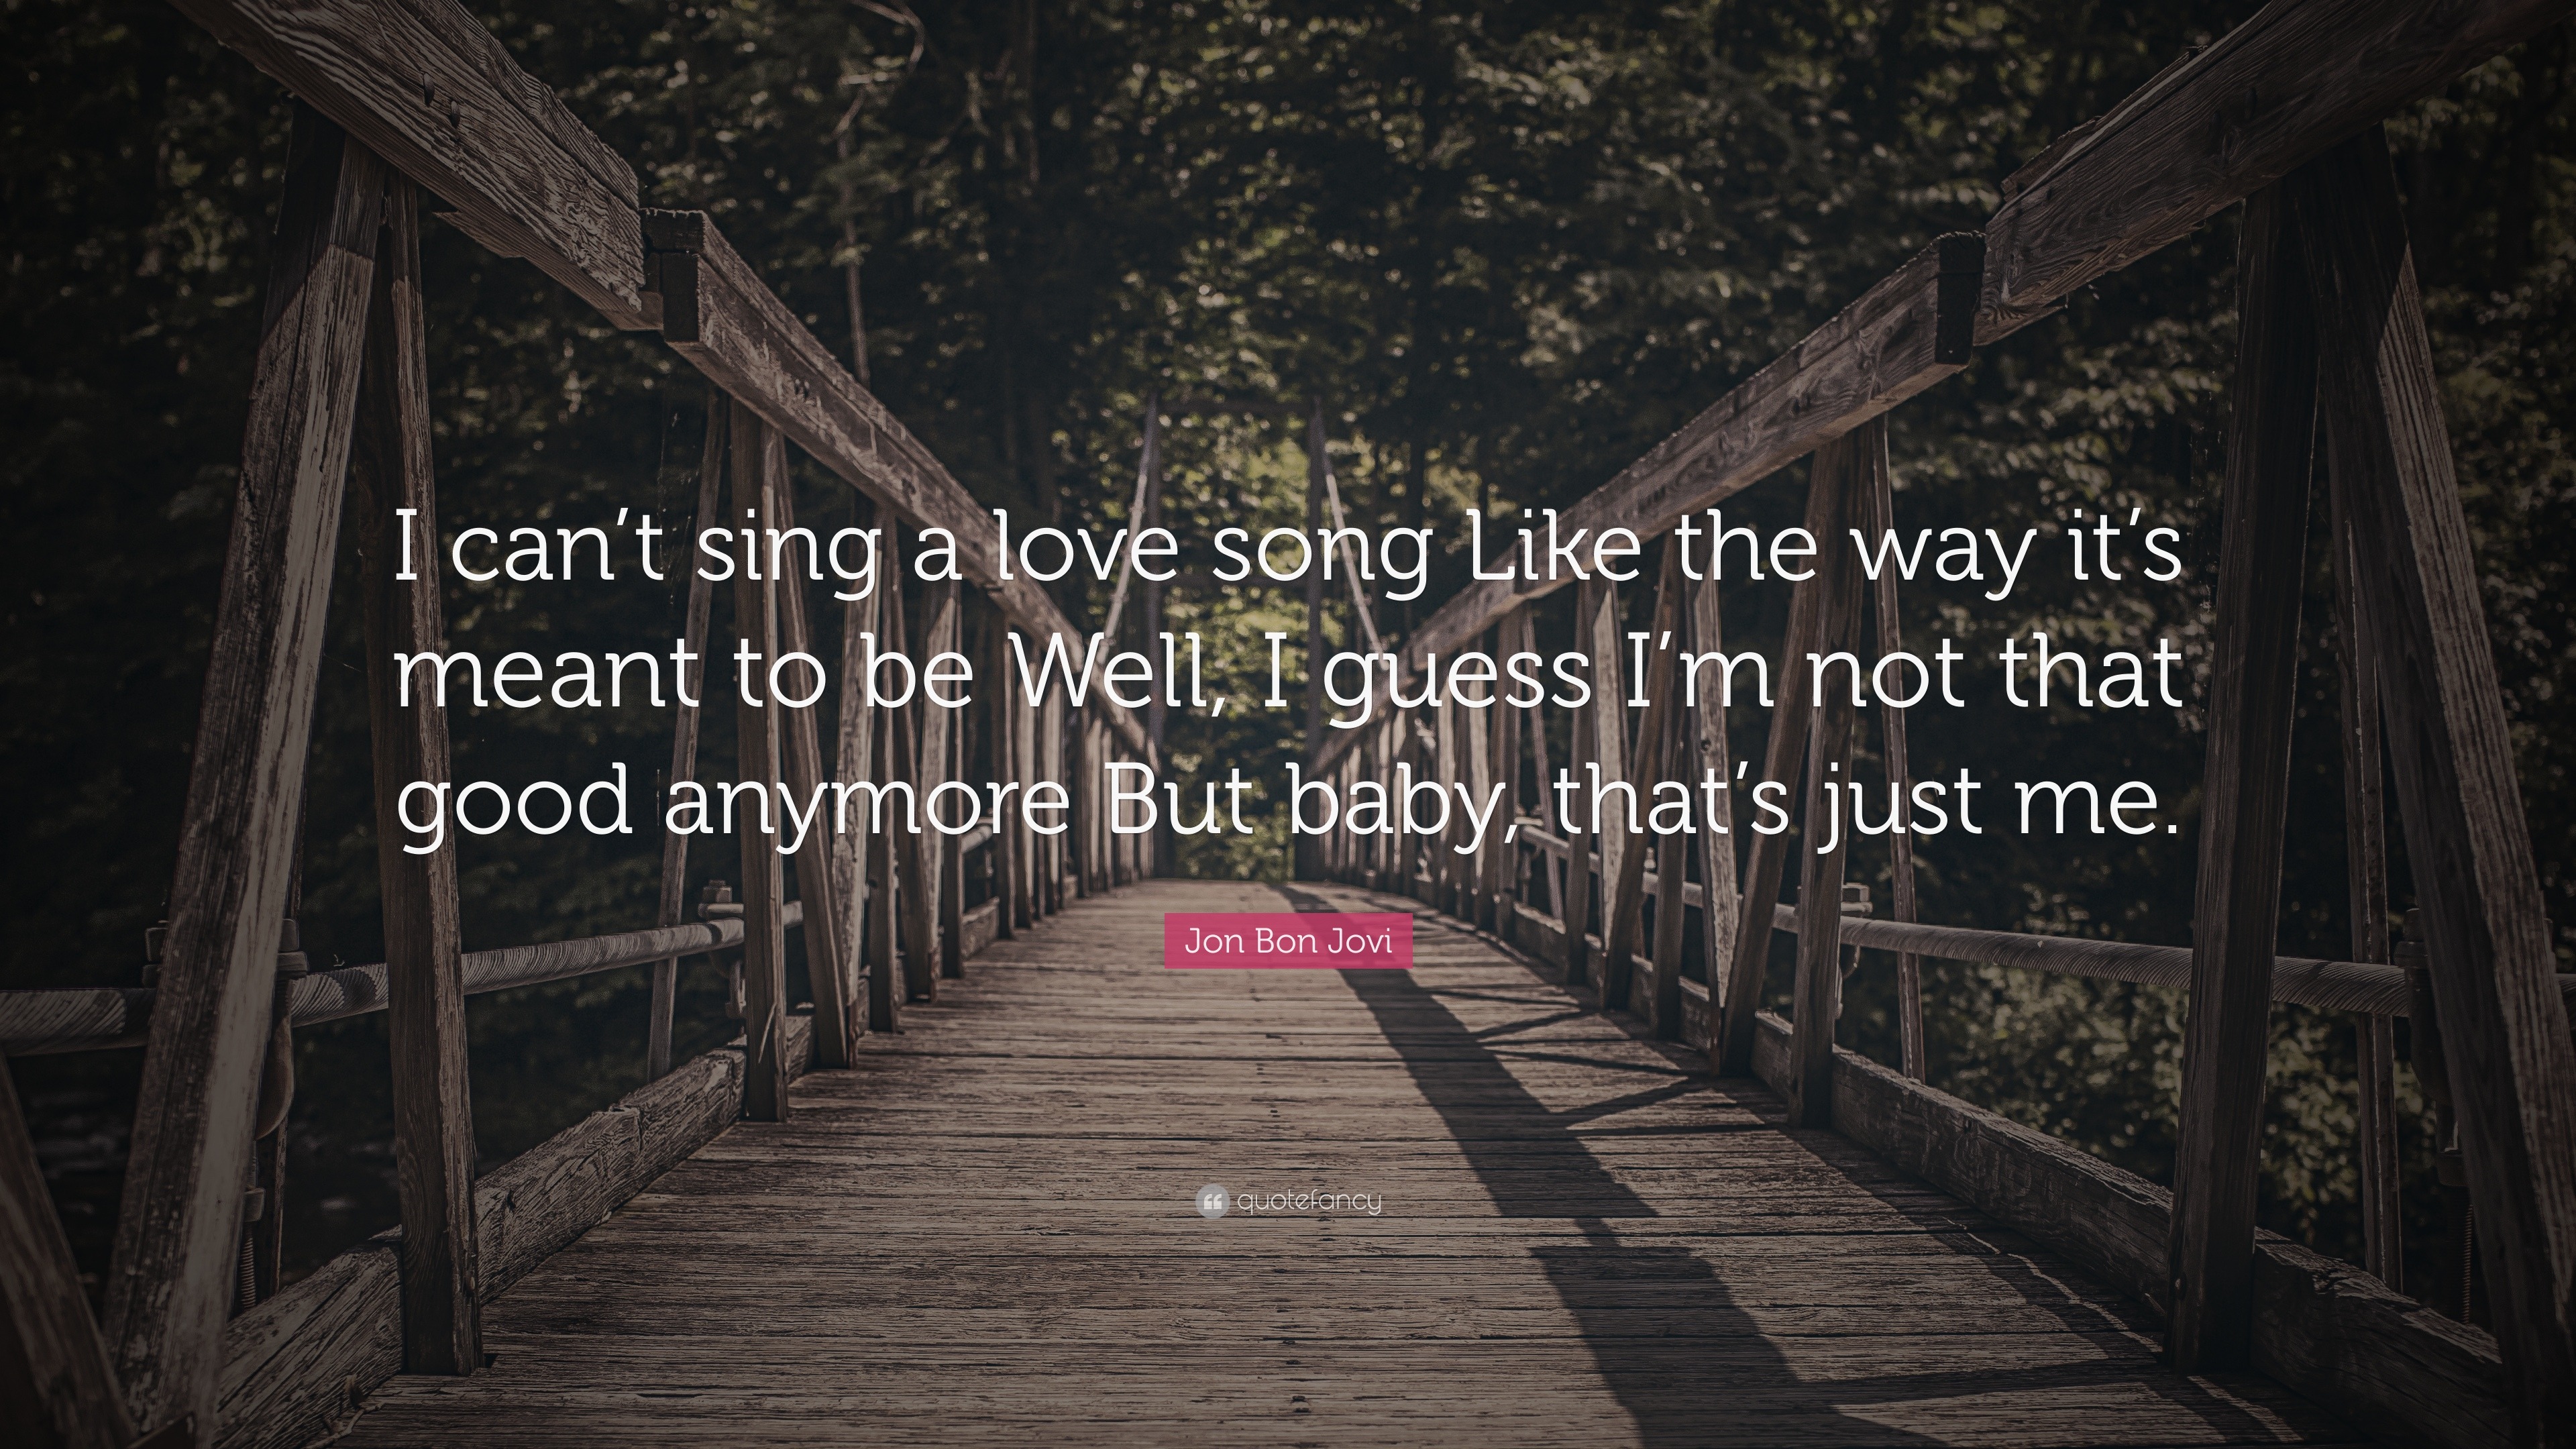 Quotes About Songs “I can t sing a love song Like the way